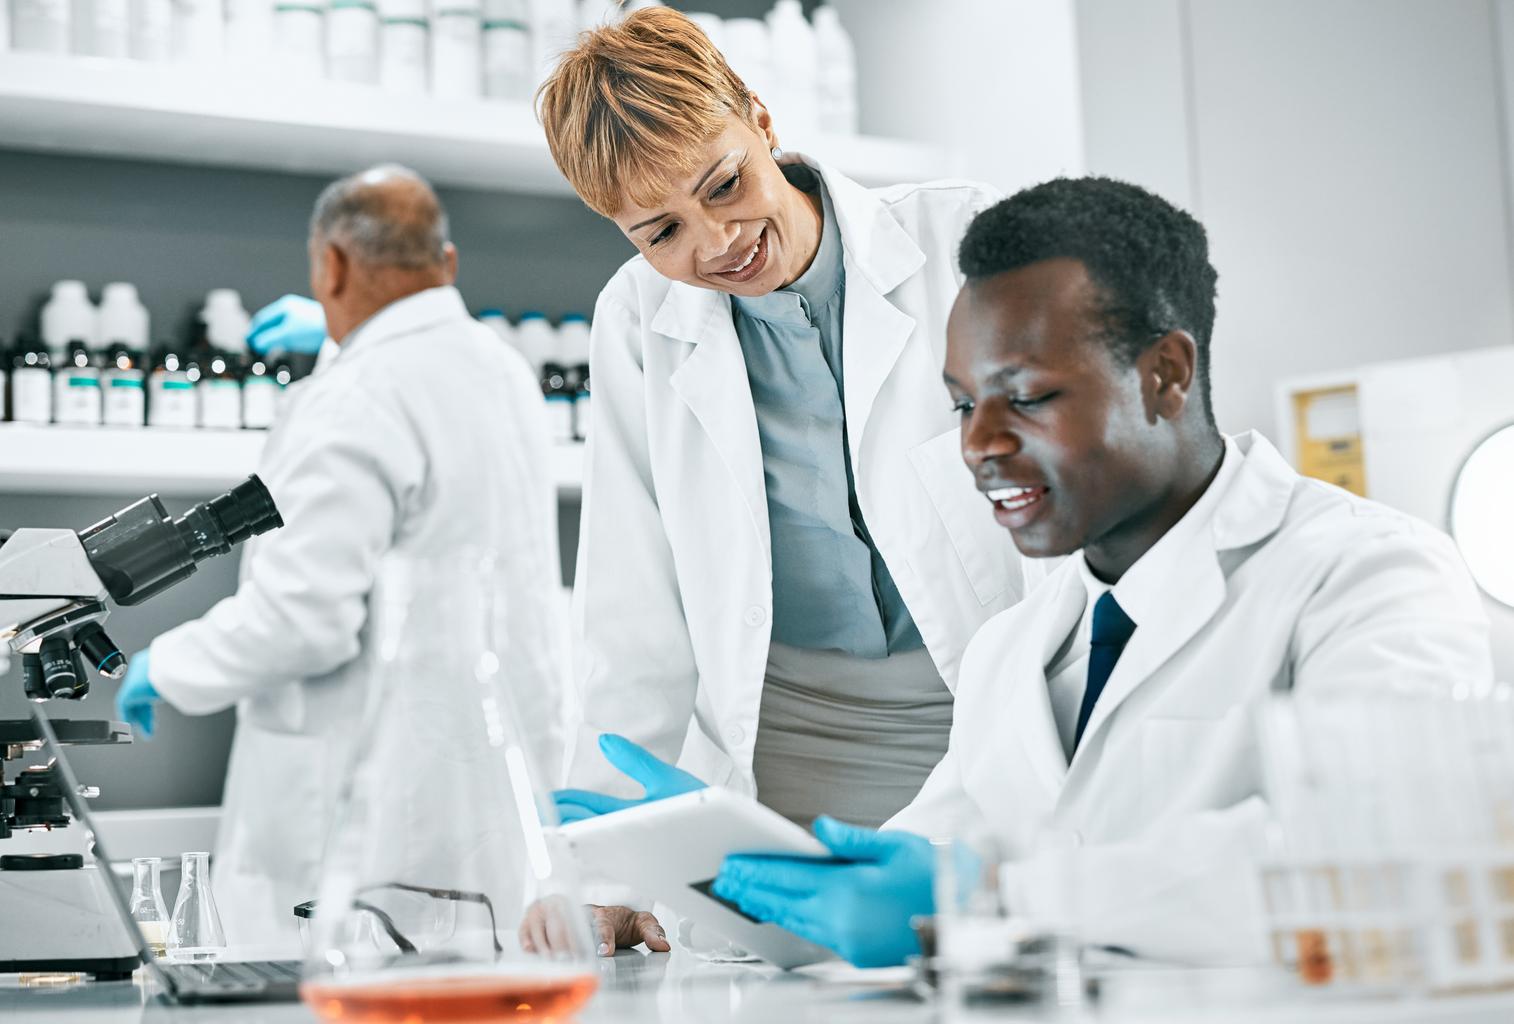 Medical professionals working together in a laboratory setting, analyzing DNA research data on a tablet